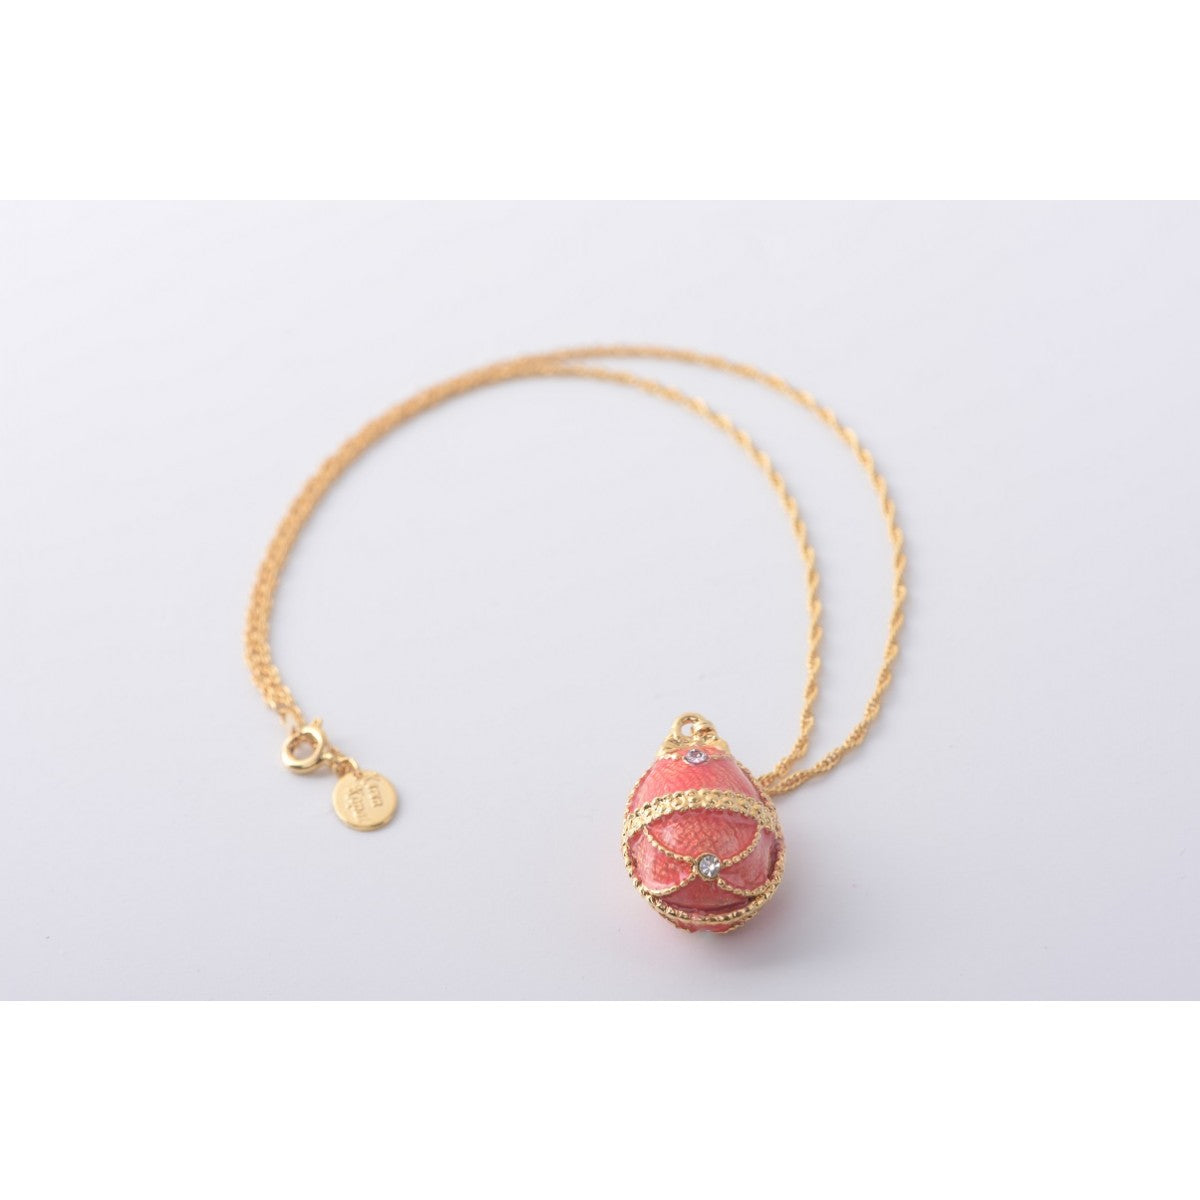 Coral Faberge Egg Pendant Necklace